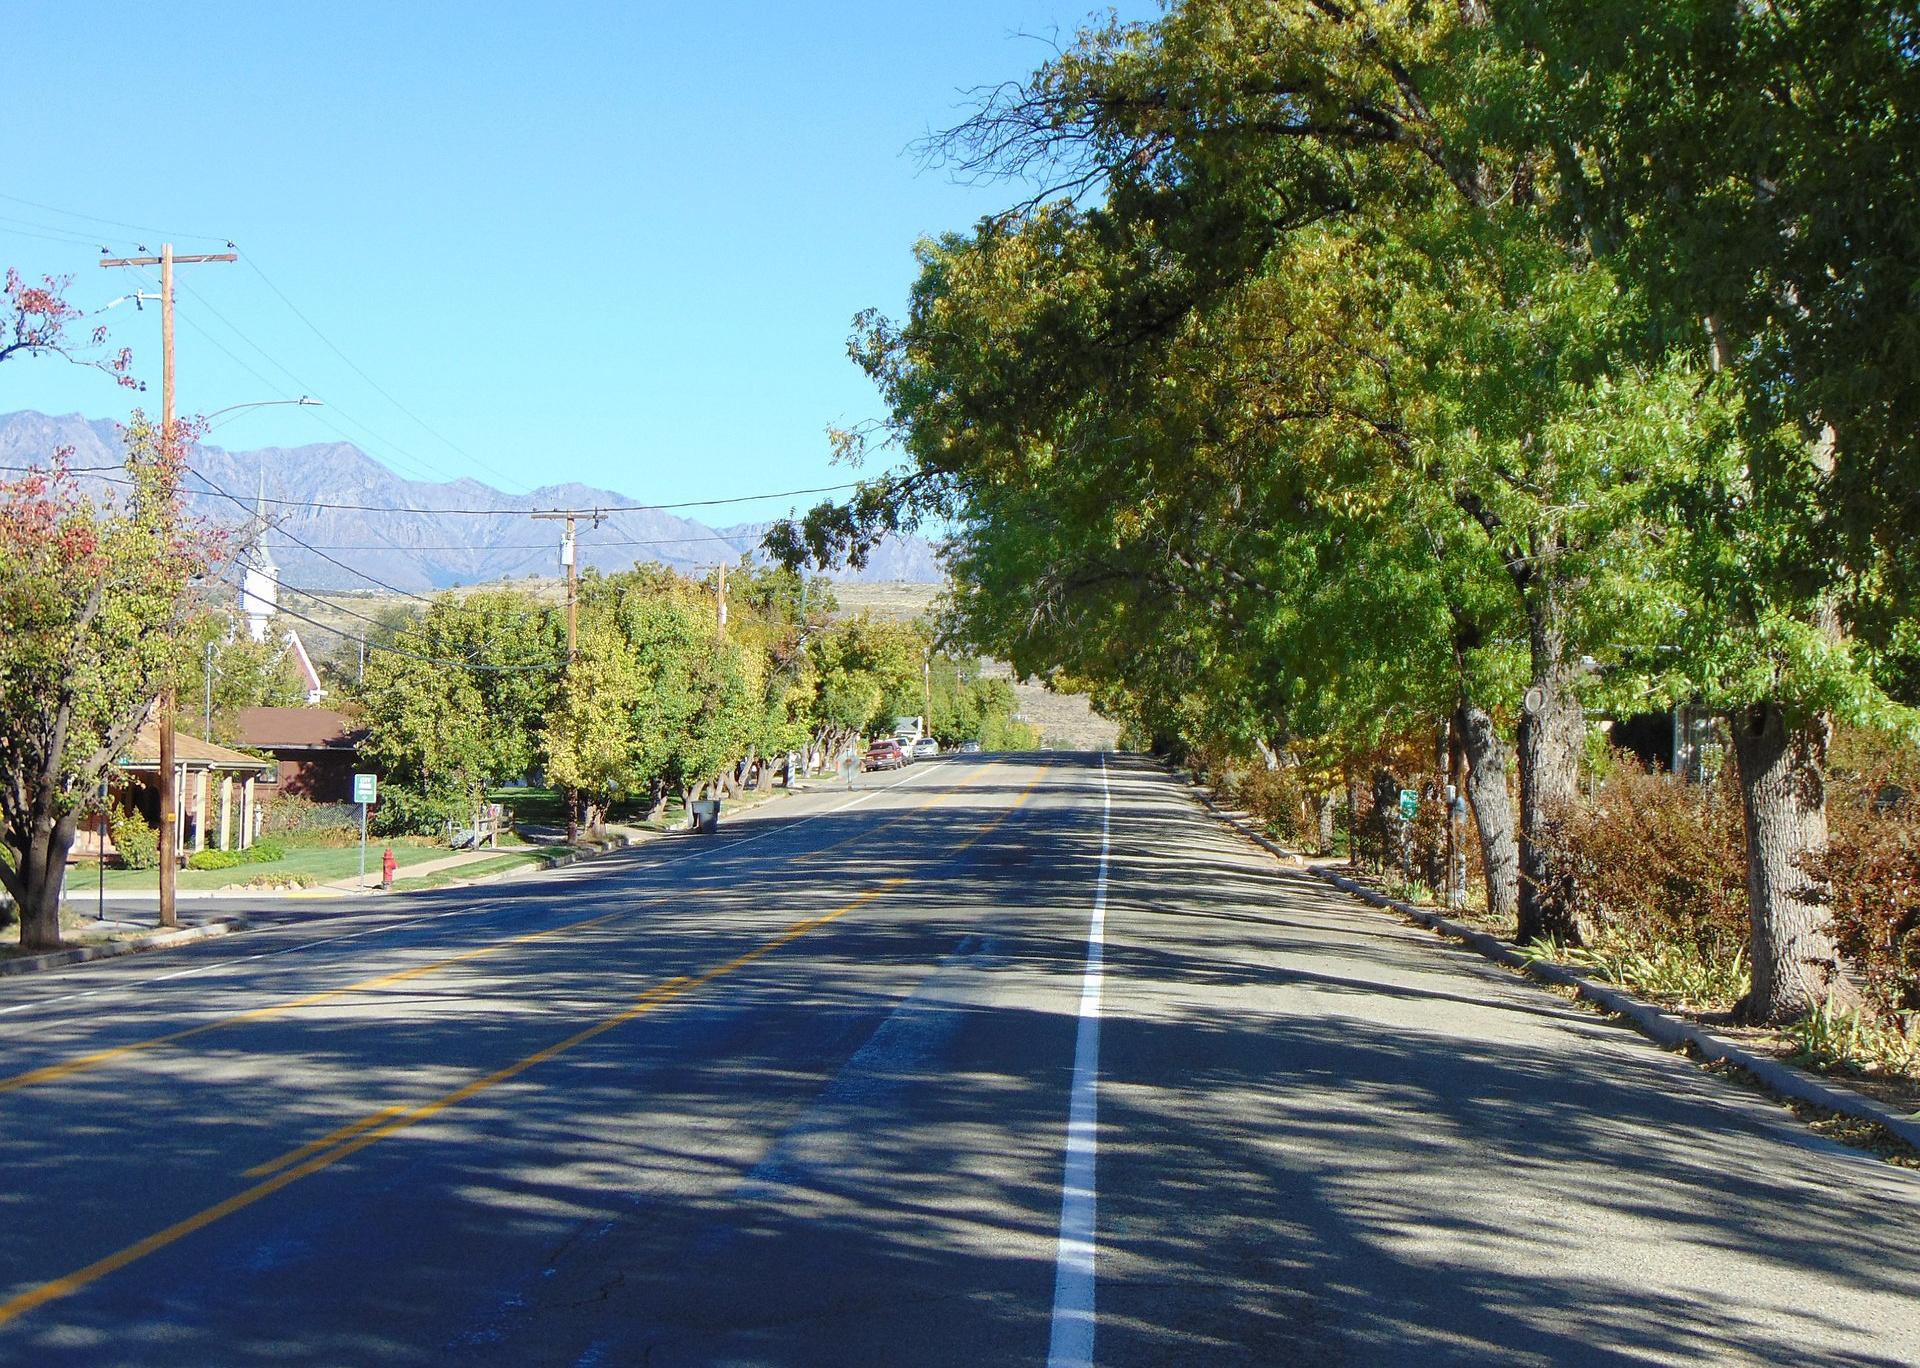 North along Toquerville Boulevard in Toquerville